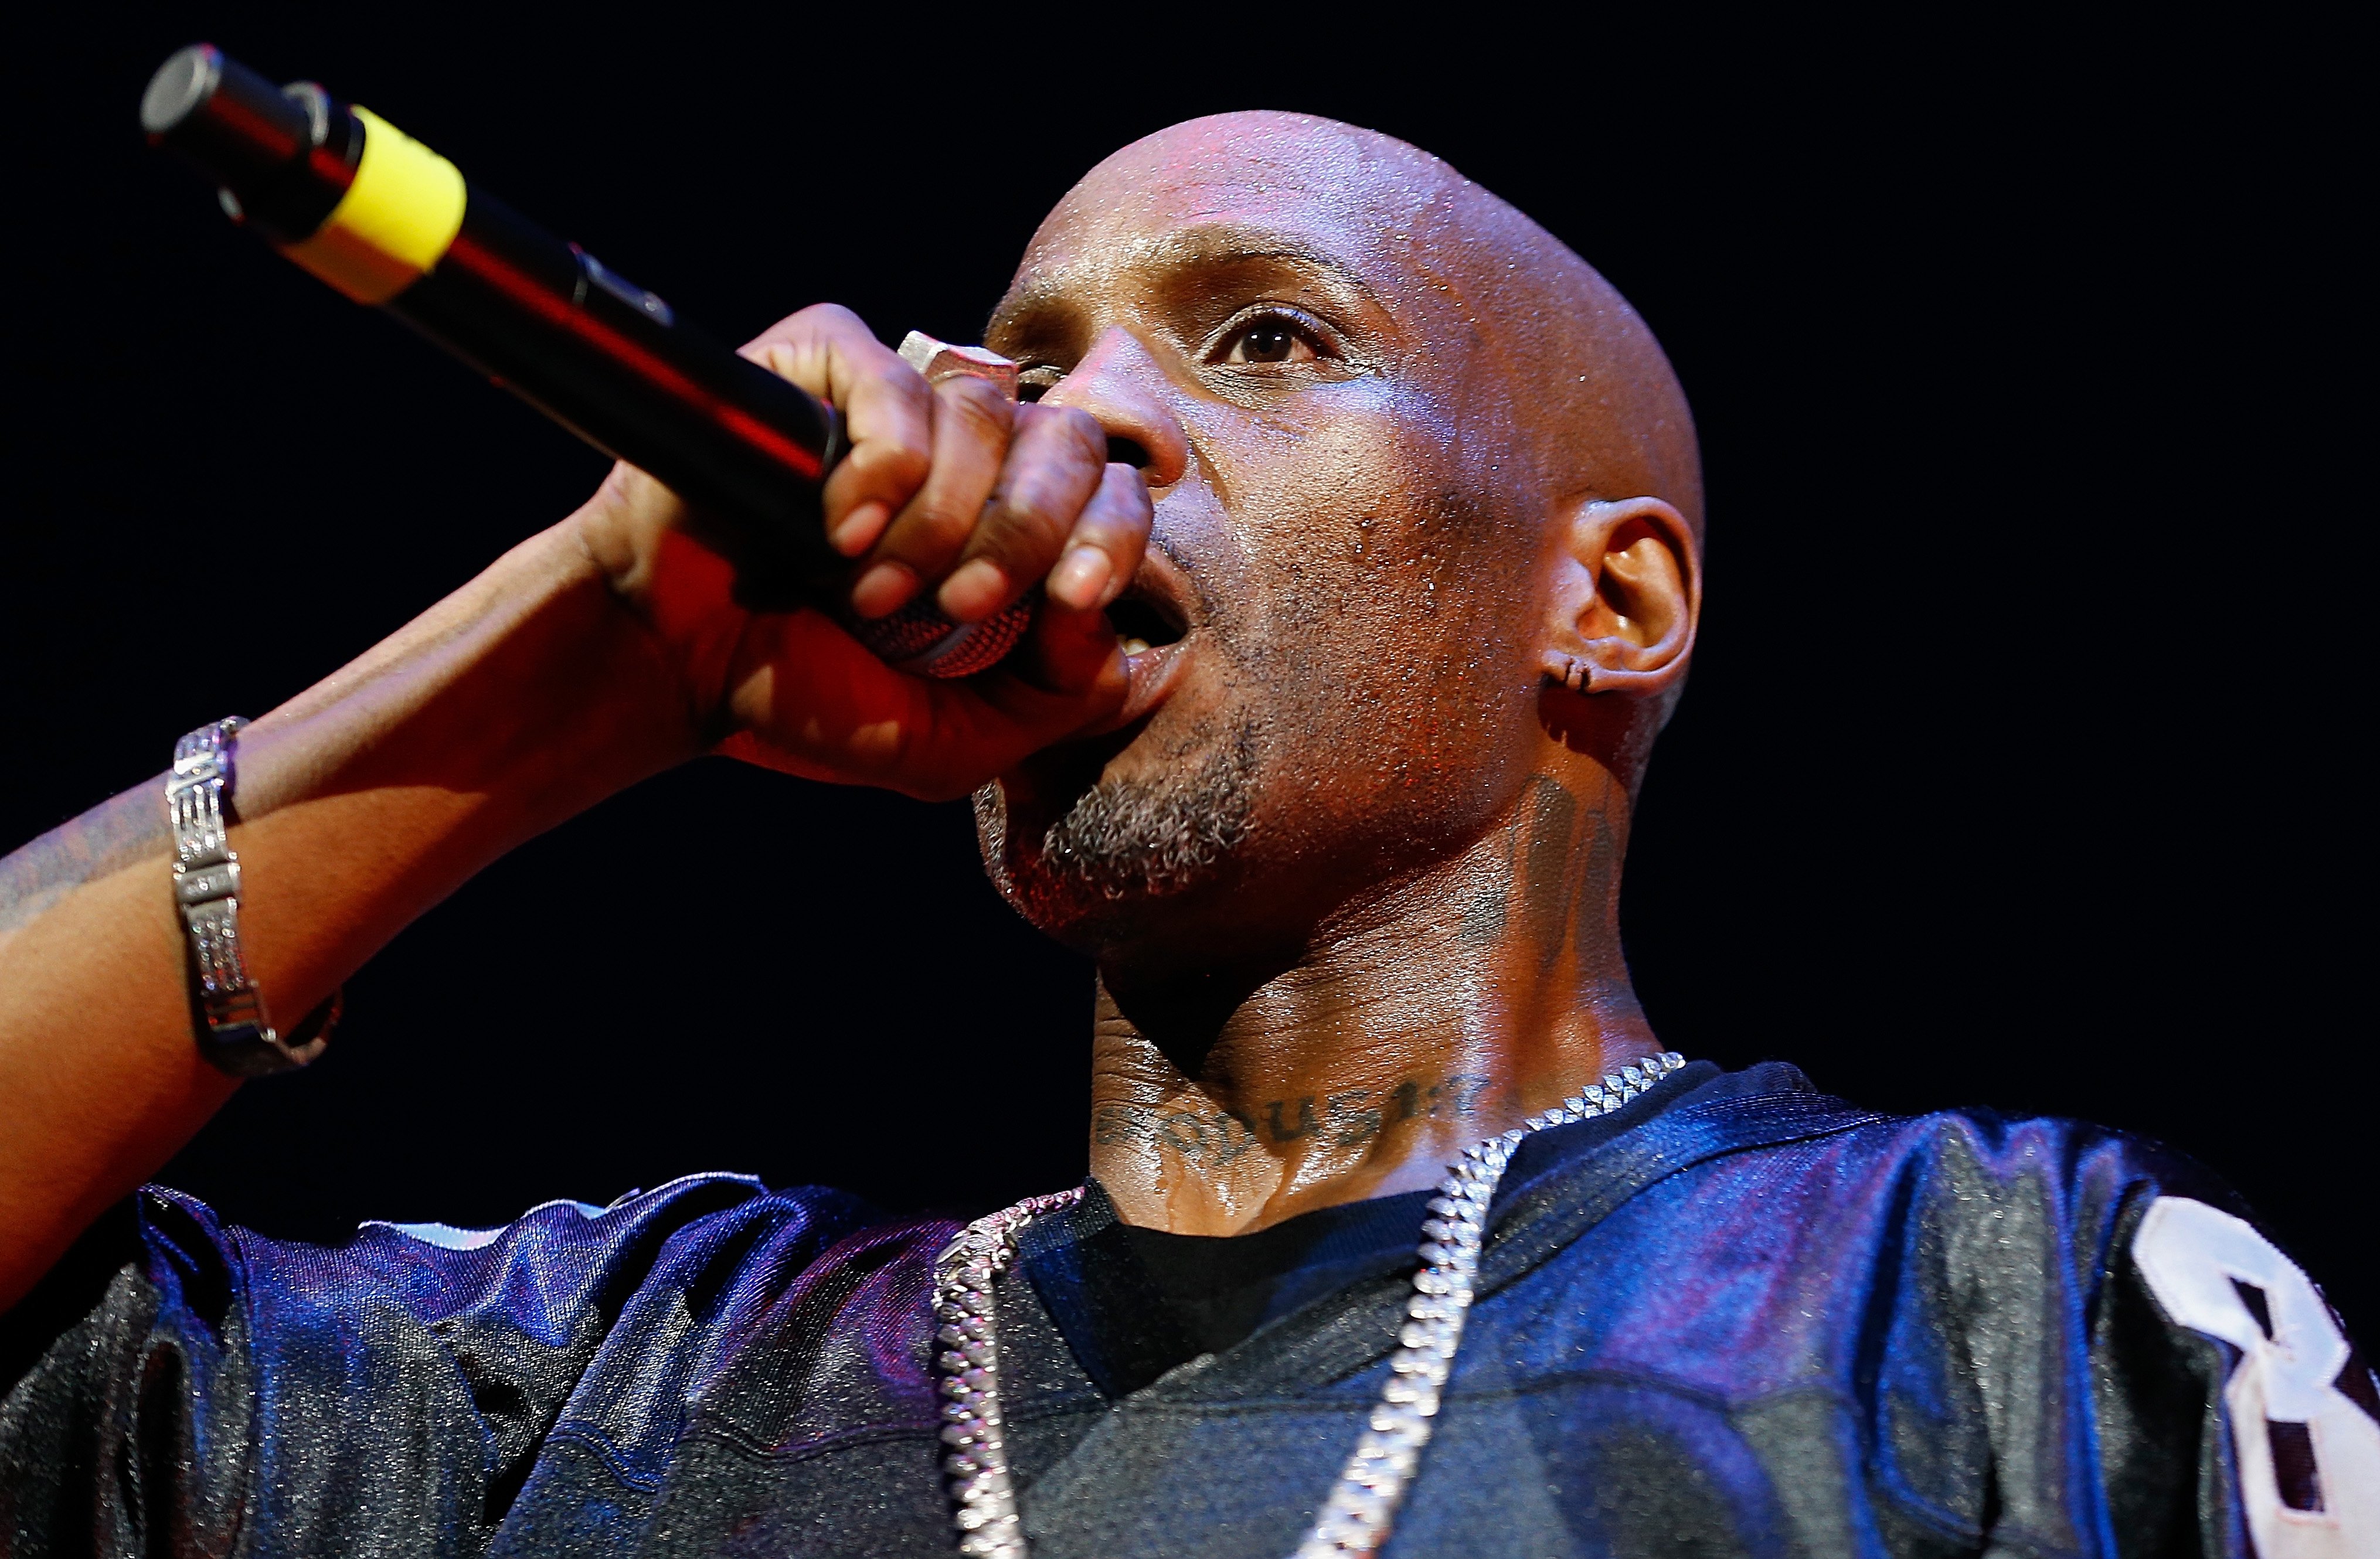 Rapper DMX rapping into a mic